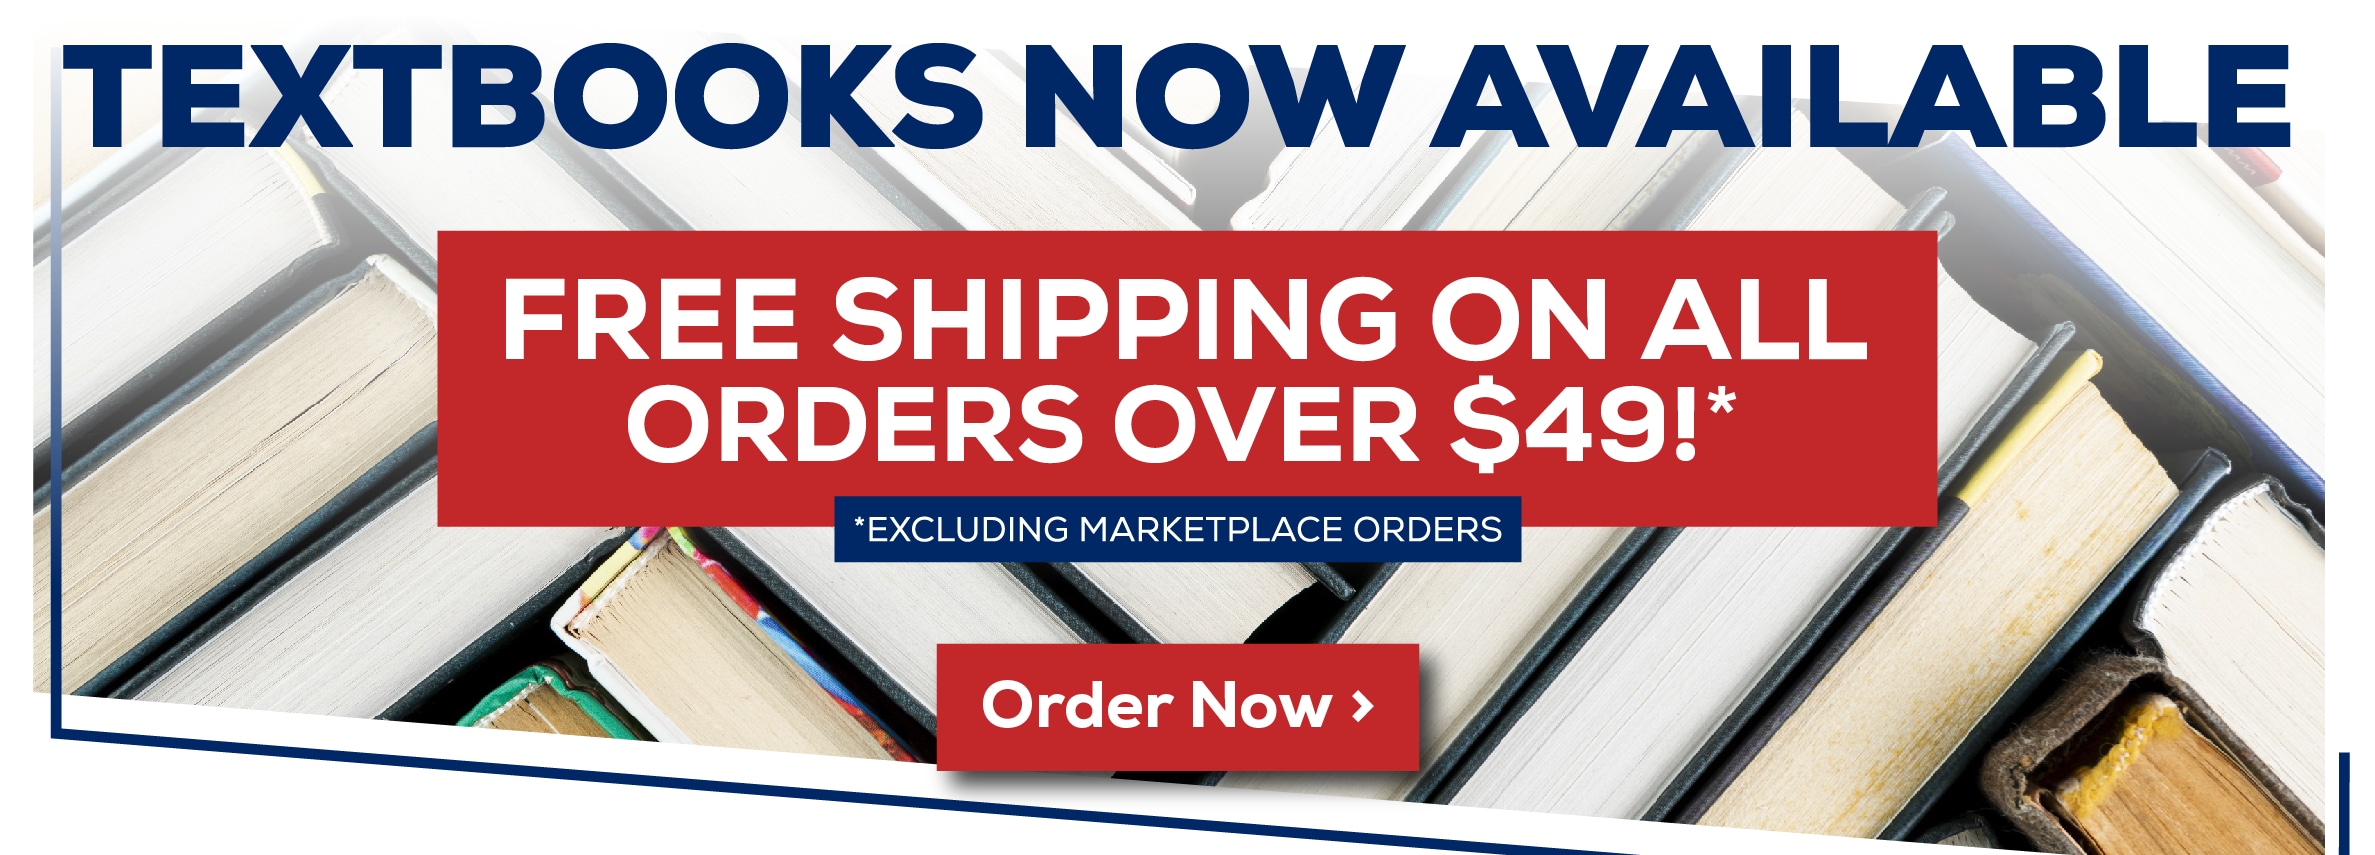 Textbooks now available. Free shipping on all orders over $49!* *Excludes marketplace purchases. Order now.